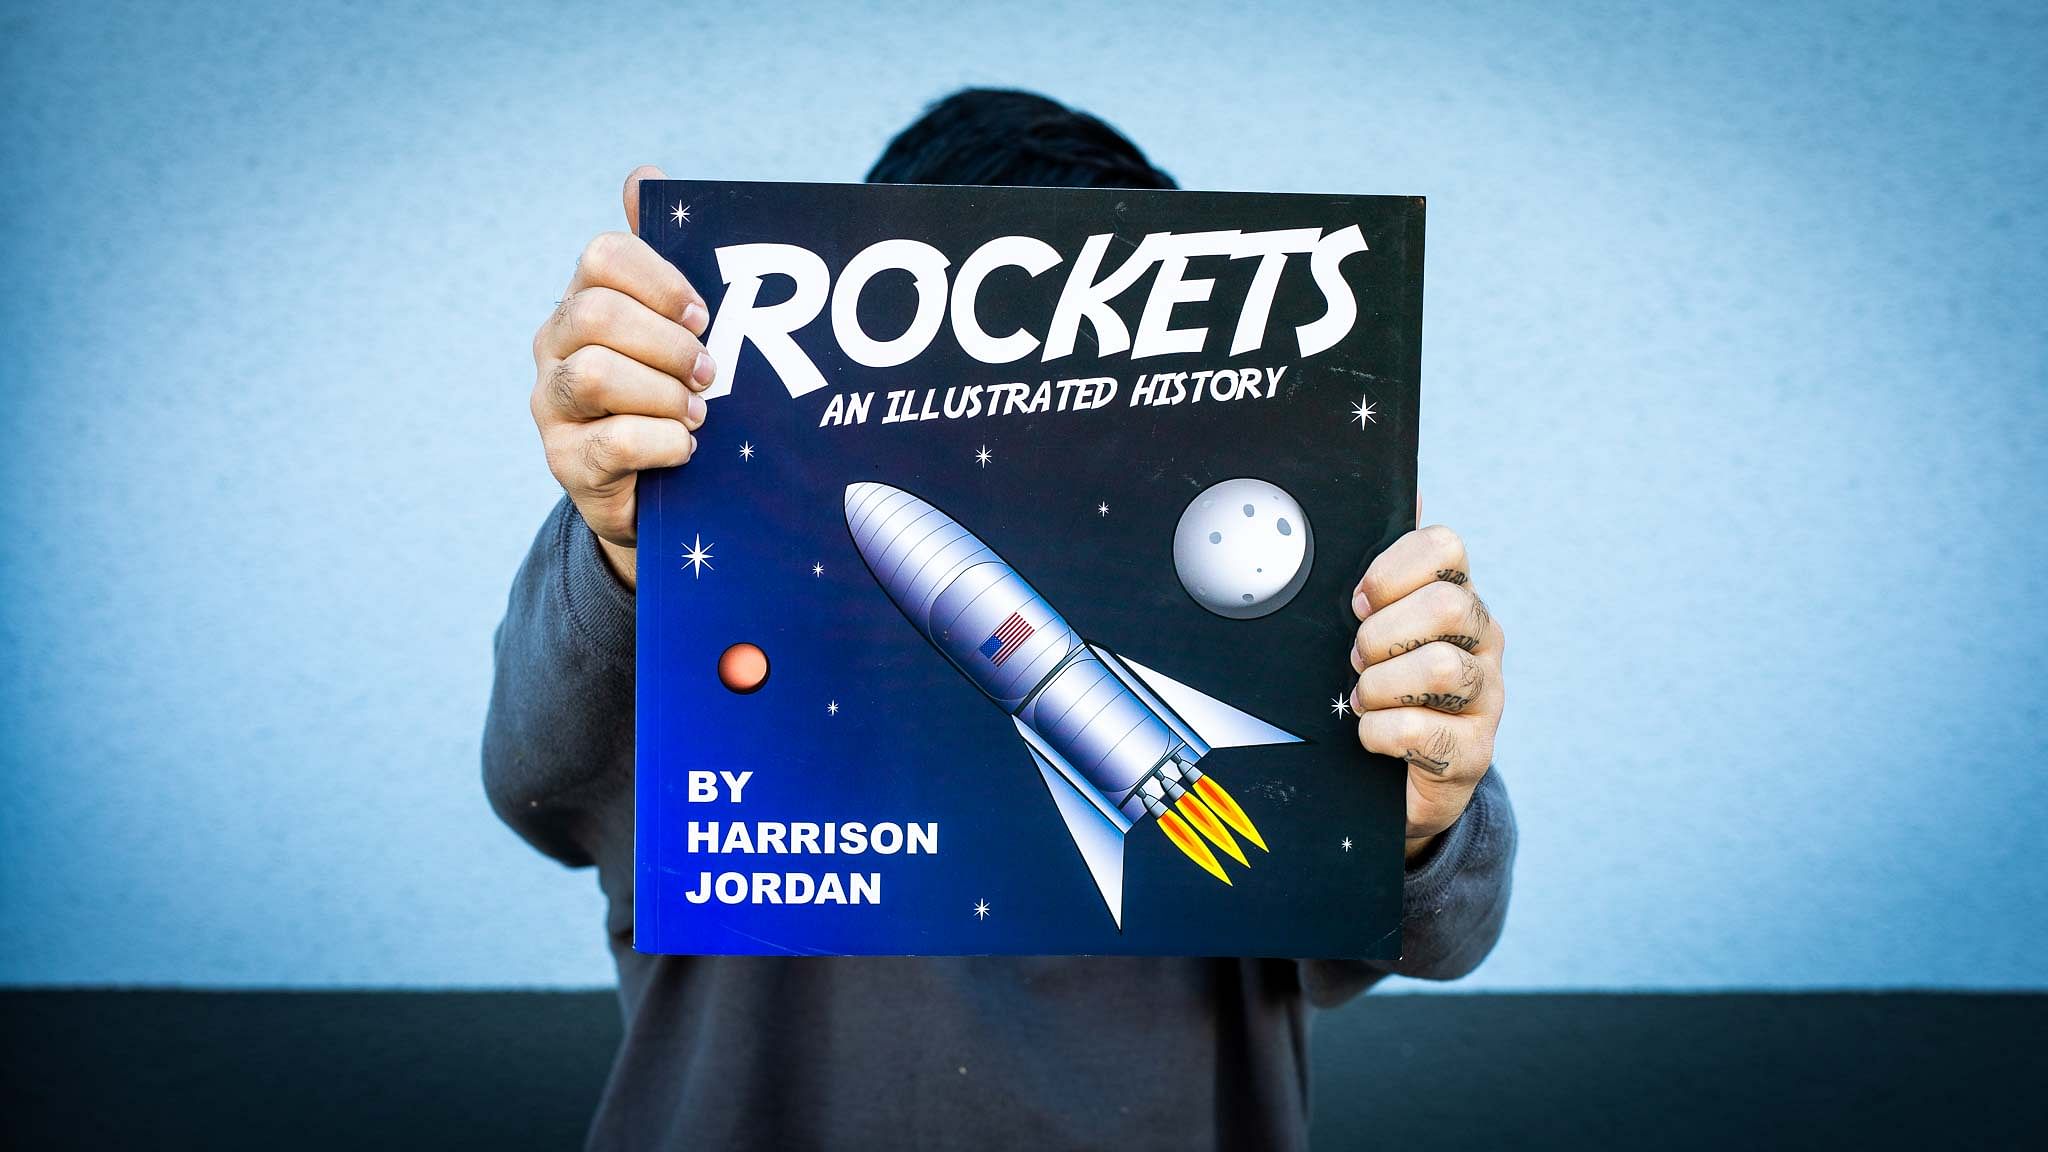 Rocket Book by Scott Green (MP4 Video Download 720p High Quality)